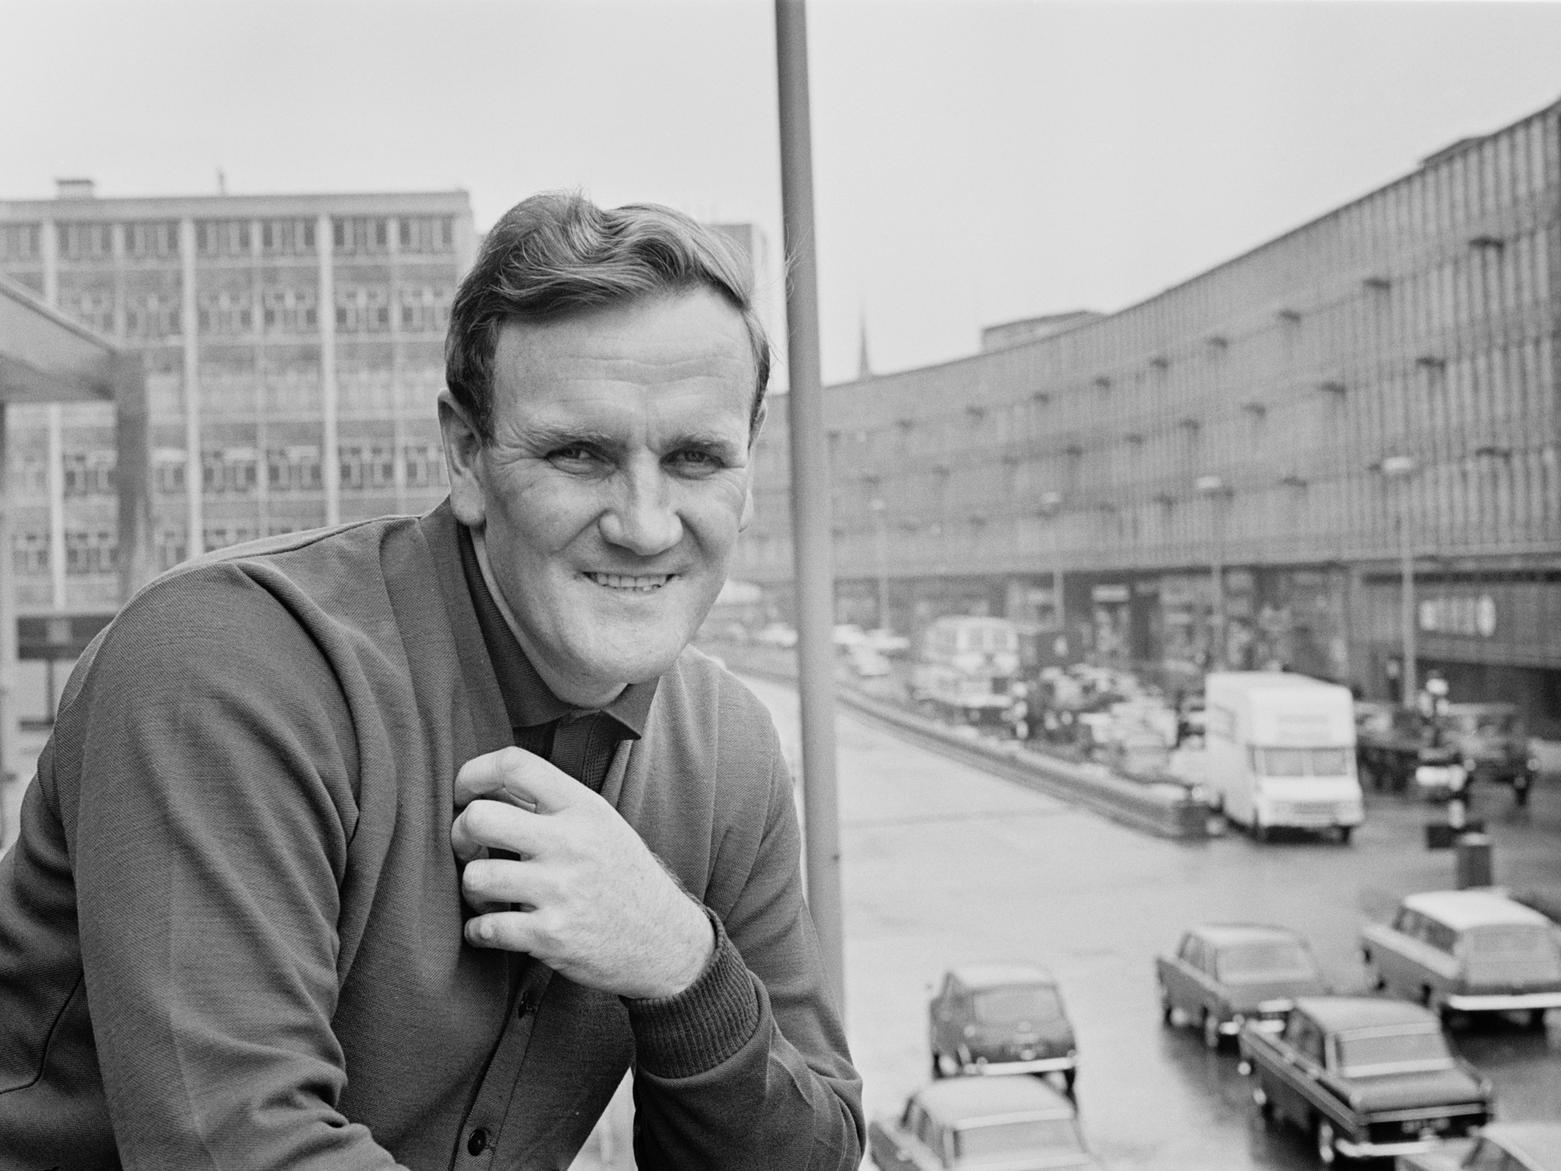 Don Revie (1927 - 1989), manager of Leeds United